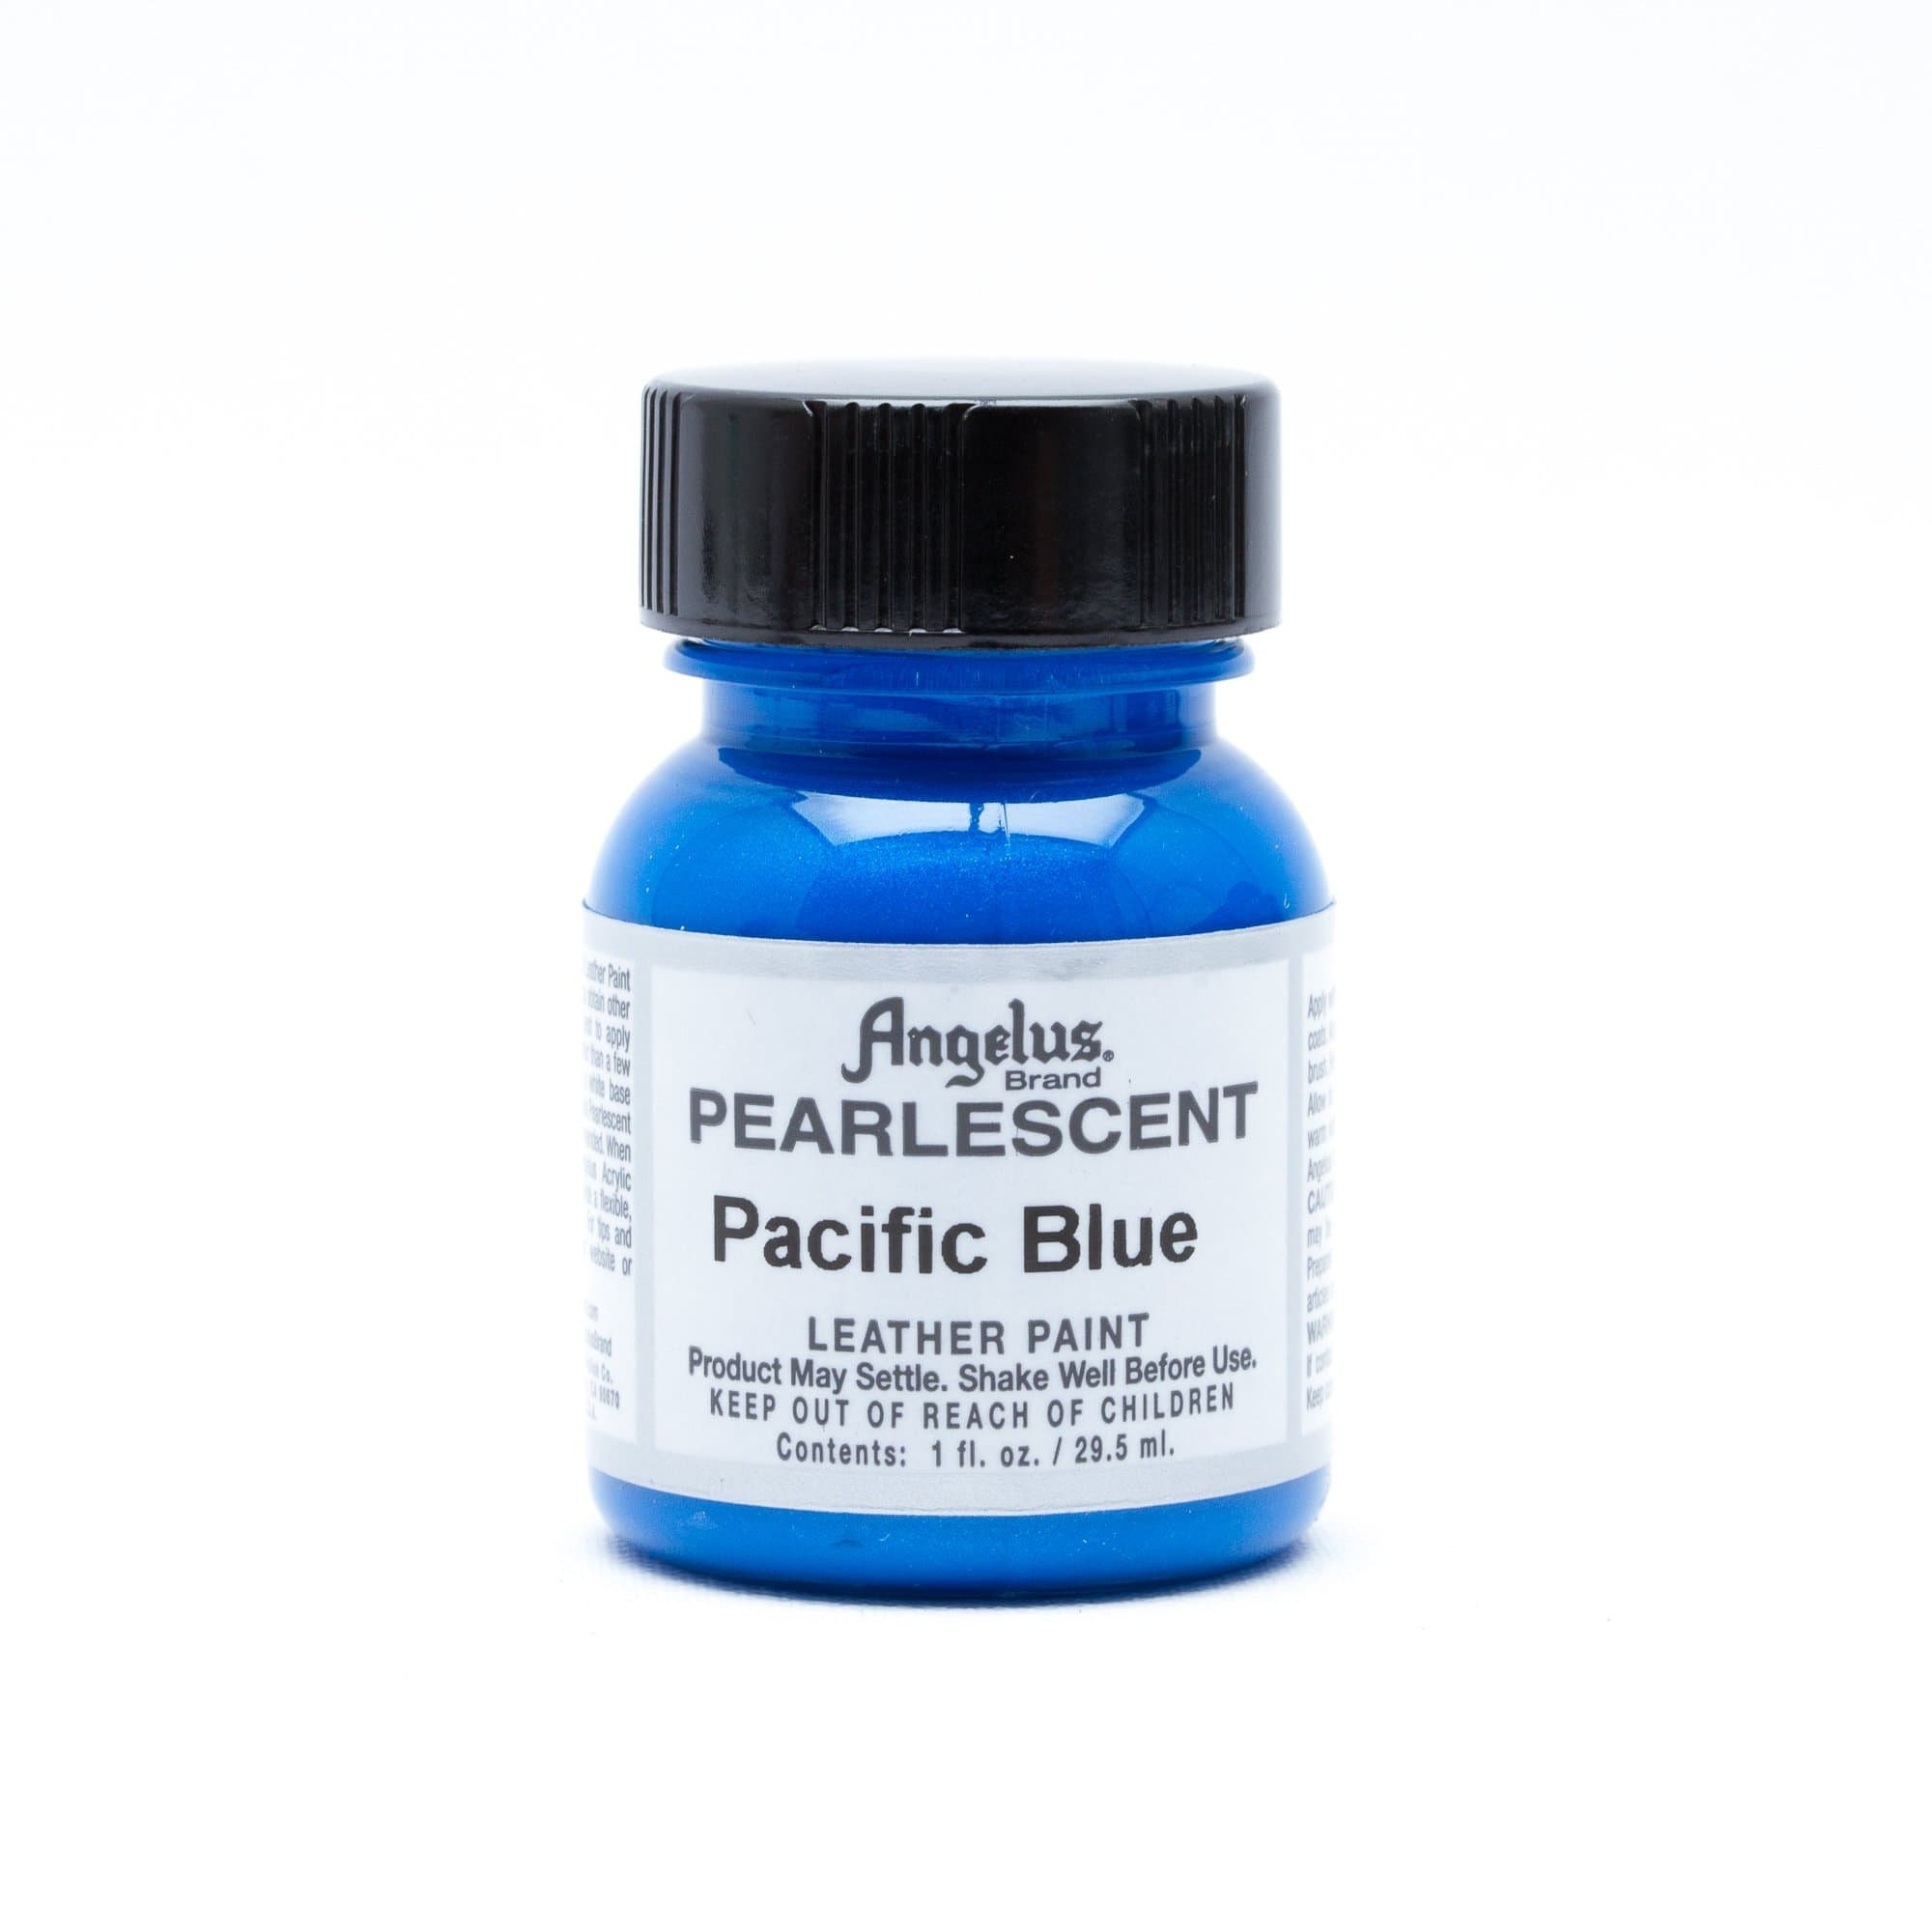 Angelus Pearlescent Paint Pacific Blue / 1oz and 4oz Bottles / Metallic  Leather Paint 